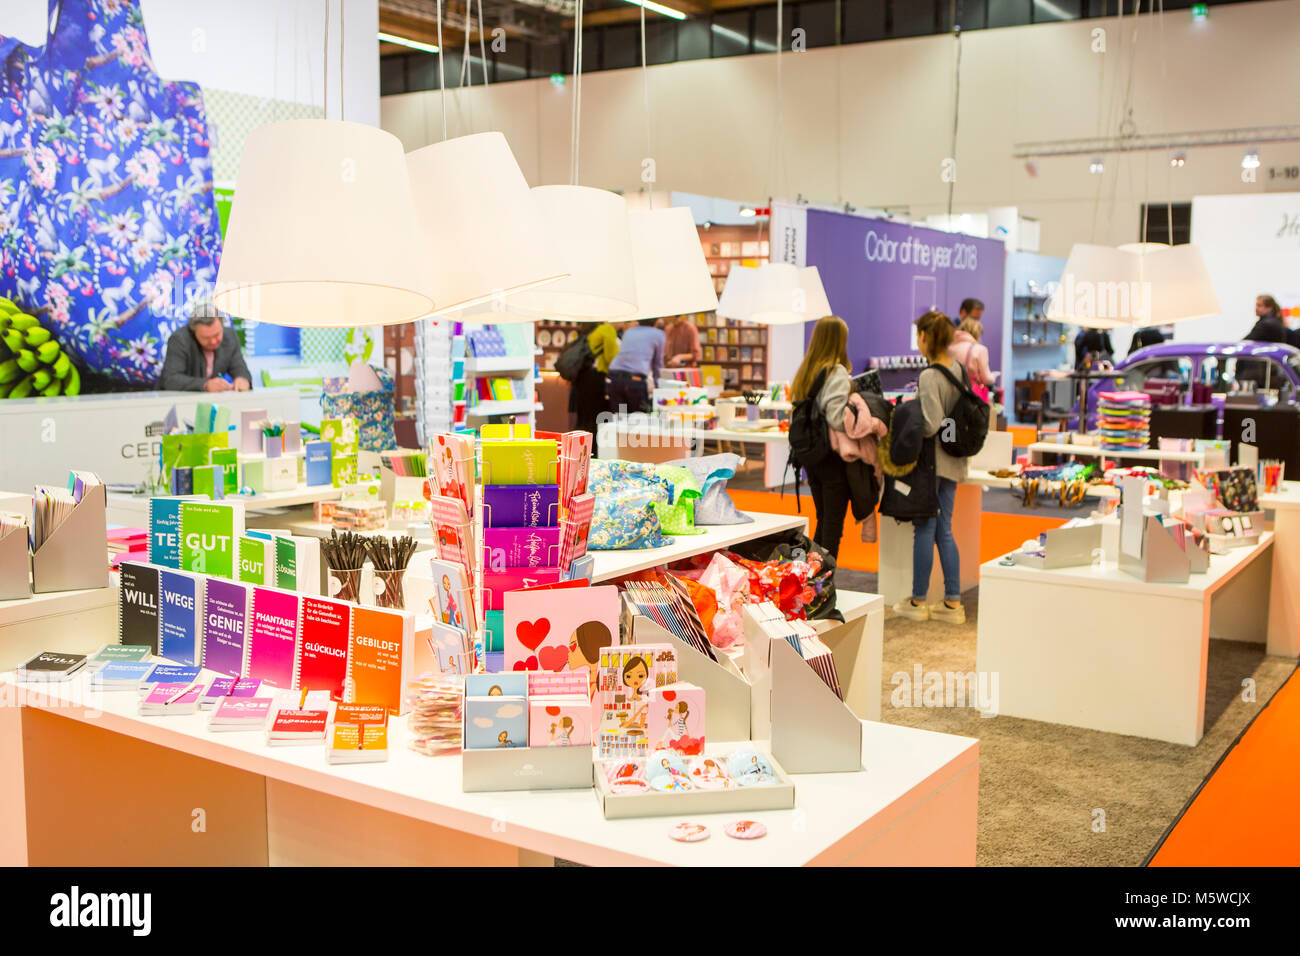 Frankfurt, Germany. 9th Feb, 2018. Ambiente 2018 (9th to 13th Feb, 2018), world's most important consumer goods trade fair, with the product segments Dining (kitchenware, tableware, household products), Giving (gifts, personal accessories) and Living (interior design, furnishings, decoration). Here: booth of CEDON MuseumShops GmbH presenting giving products. Credit: Christian Lademann Stock Photo